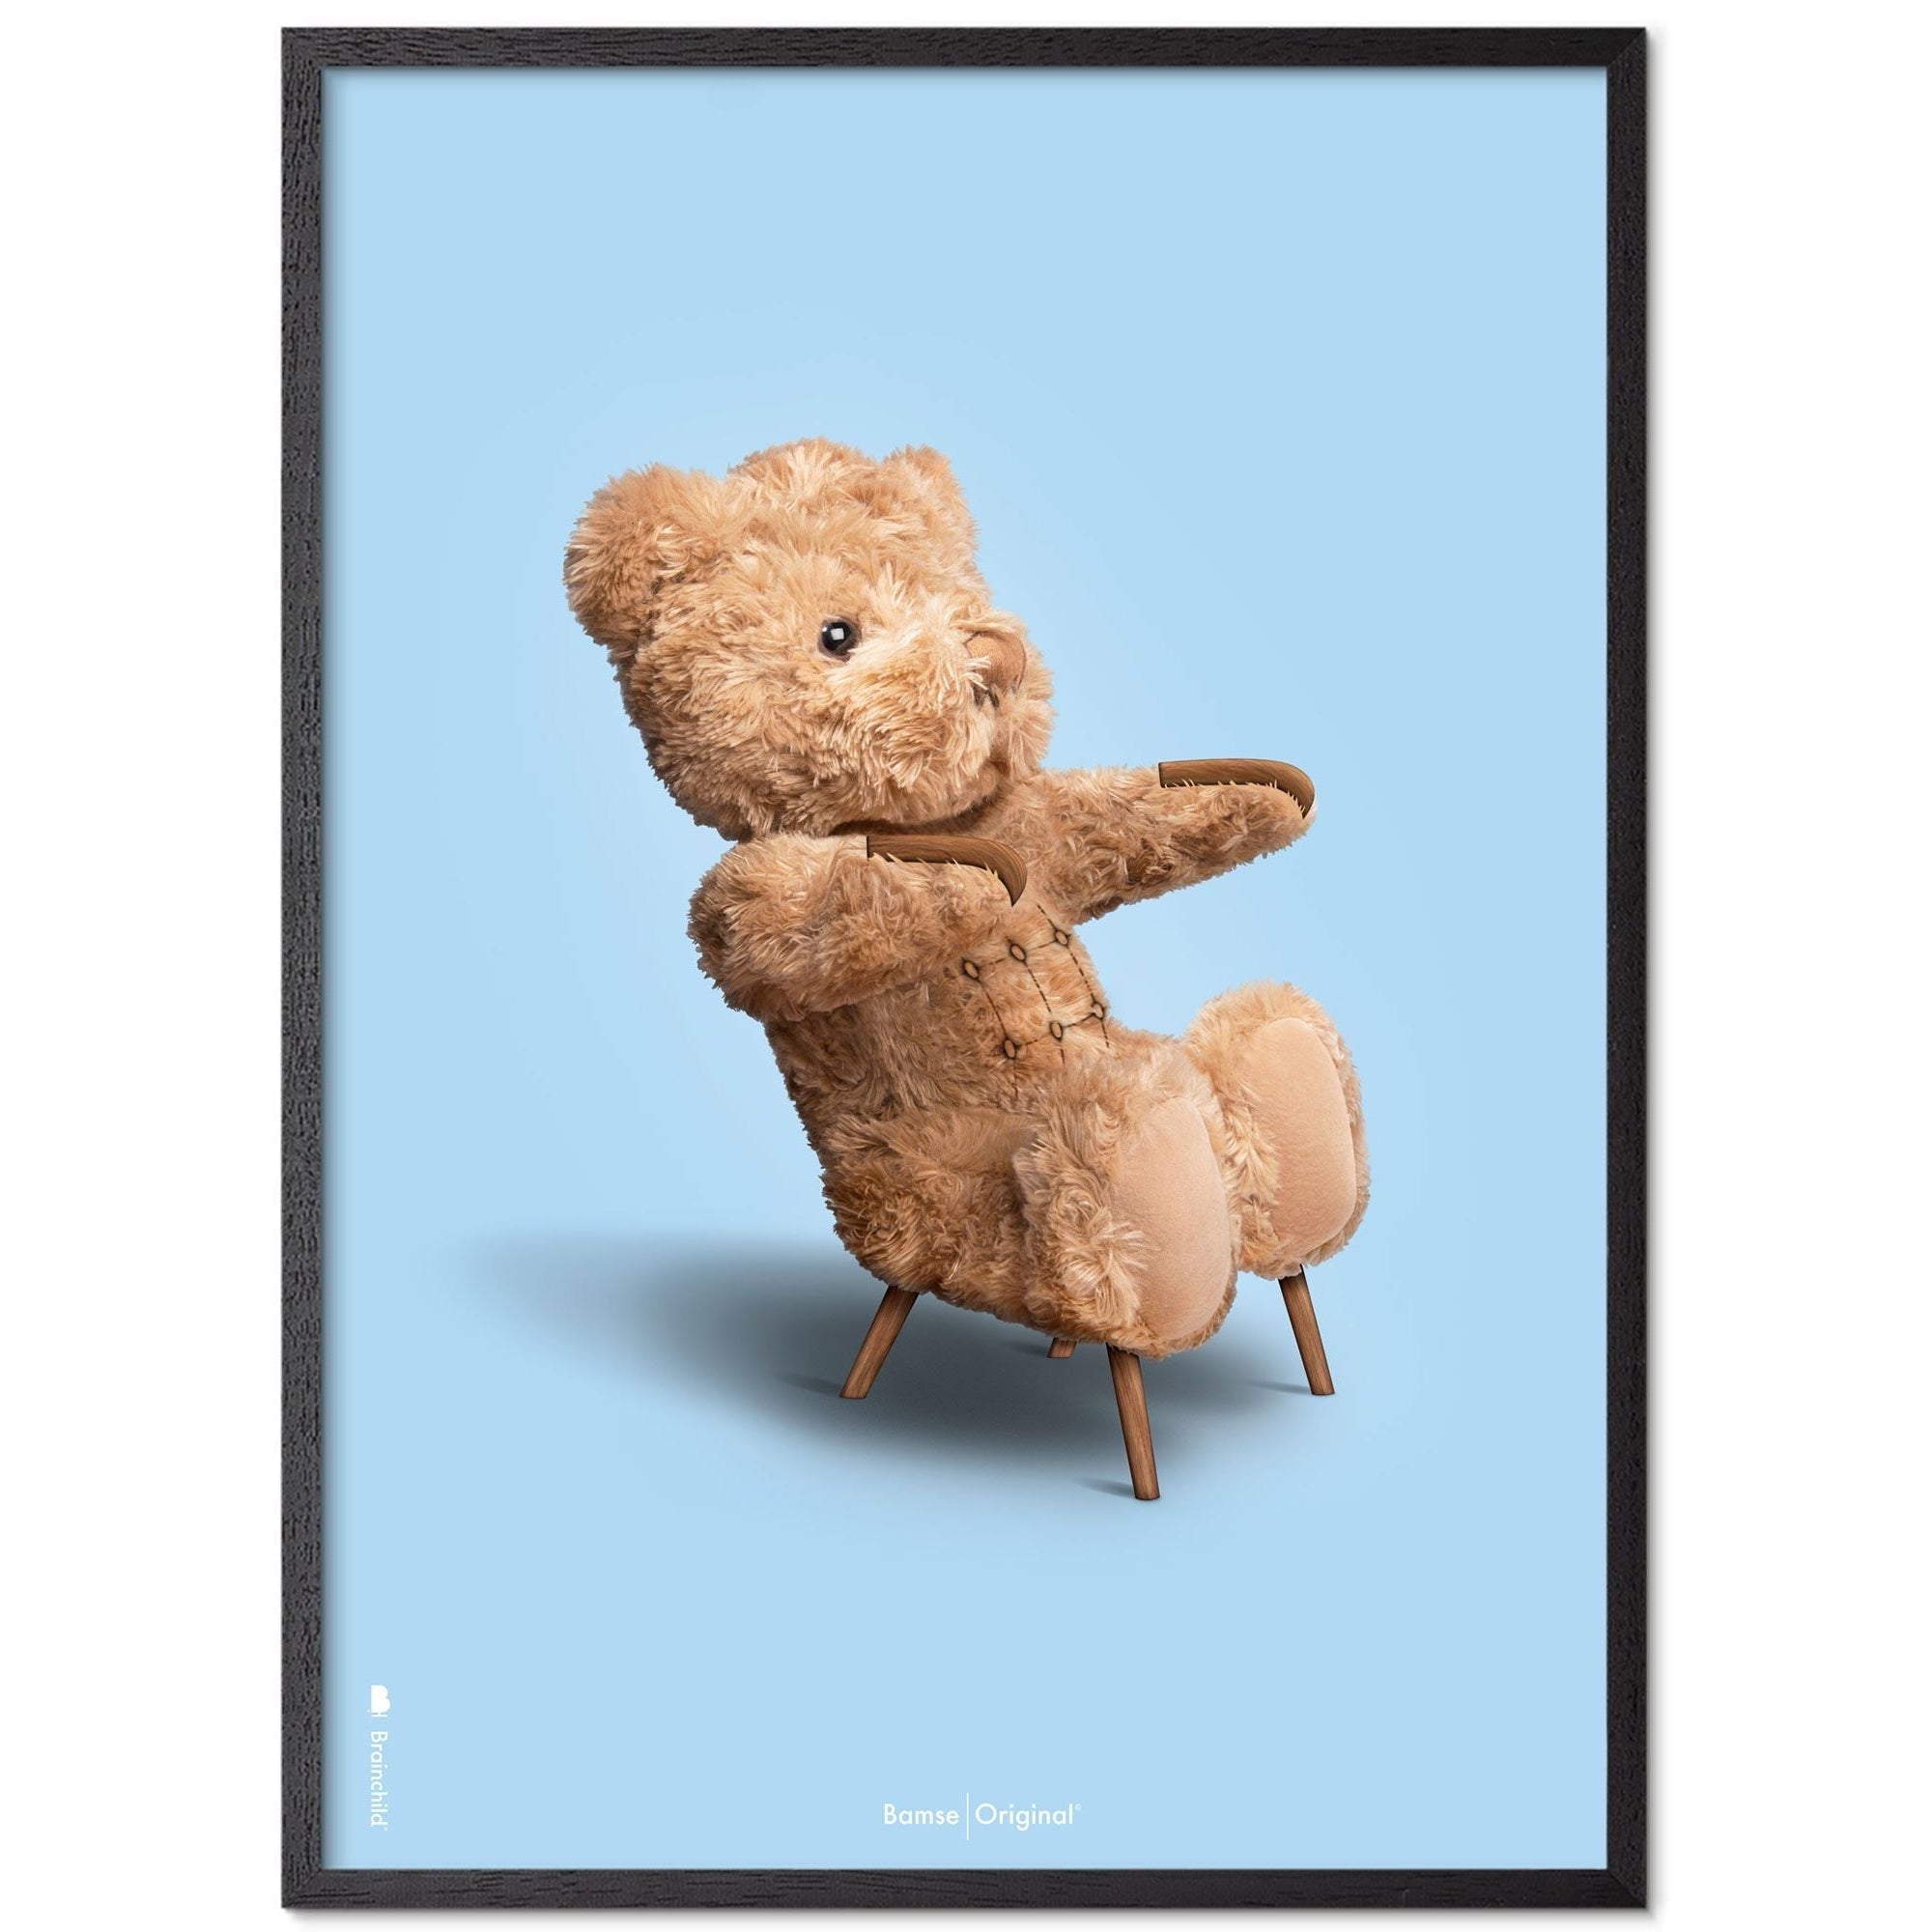 Brainchild Teddy Bear Classic Poster Frame Made Of Black Lacquered Wood 50x70 Cm, Light Blue Background